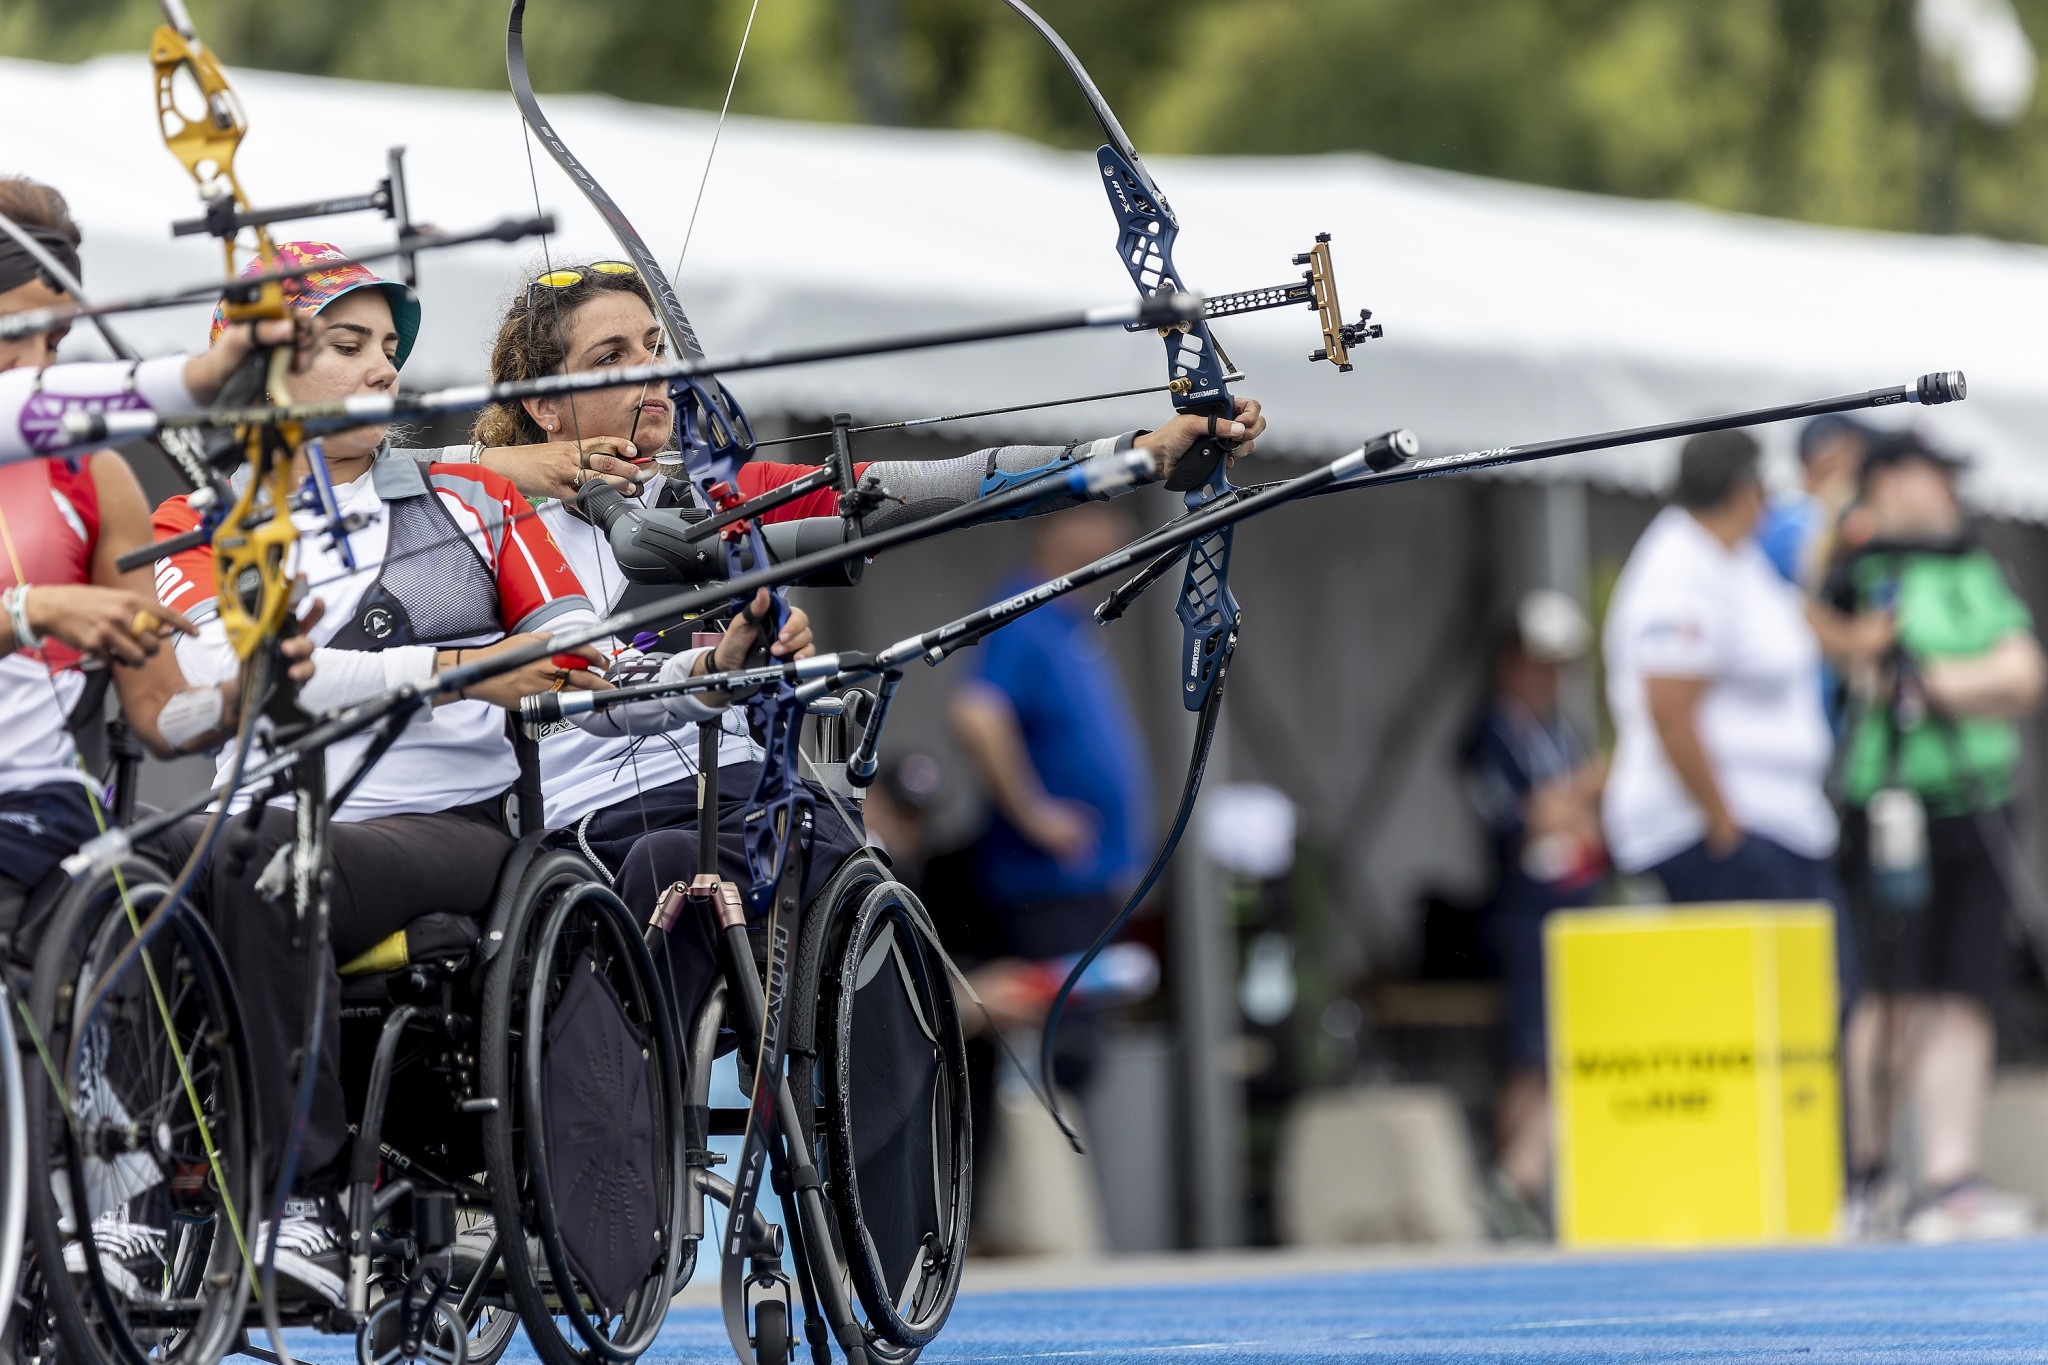 The qualifying rounds of the Para archery competition took place in a car park that had been turned into a target range outside the Rotterdam Ahoy ©EPC